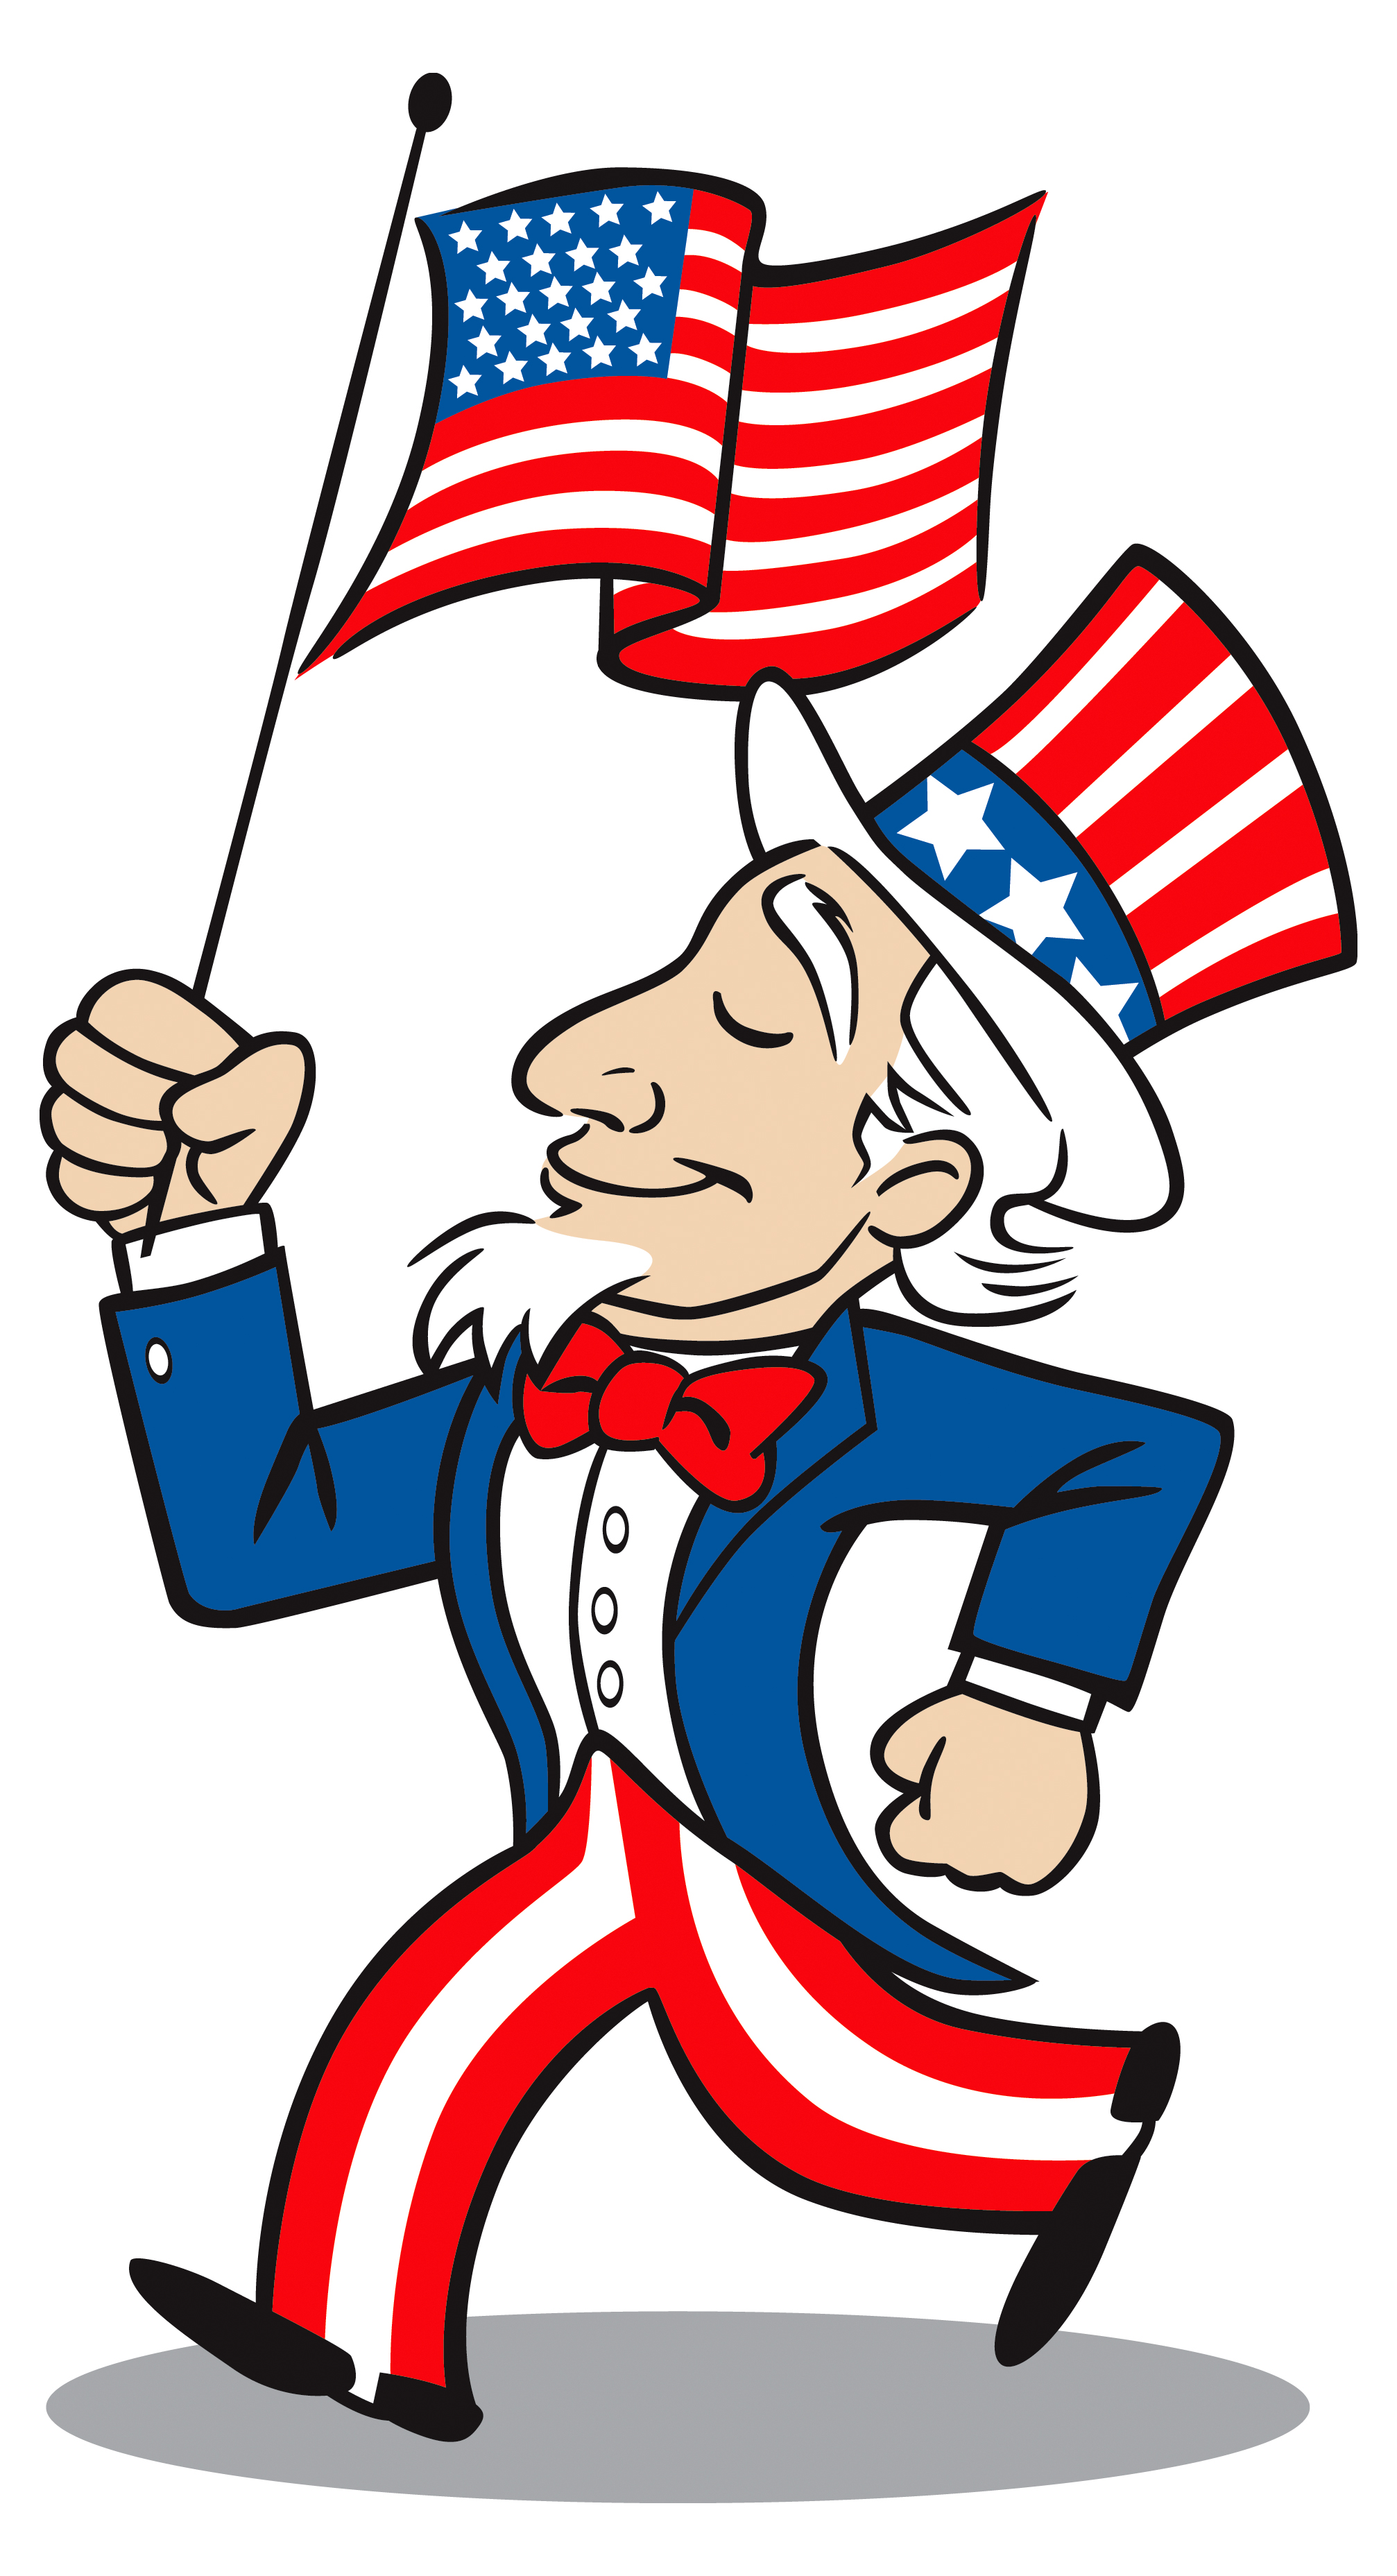 Uncle Sam Day is September